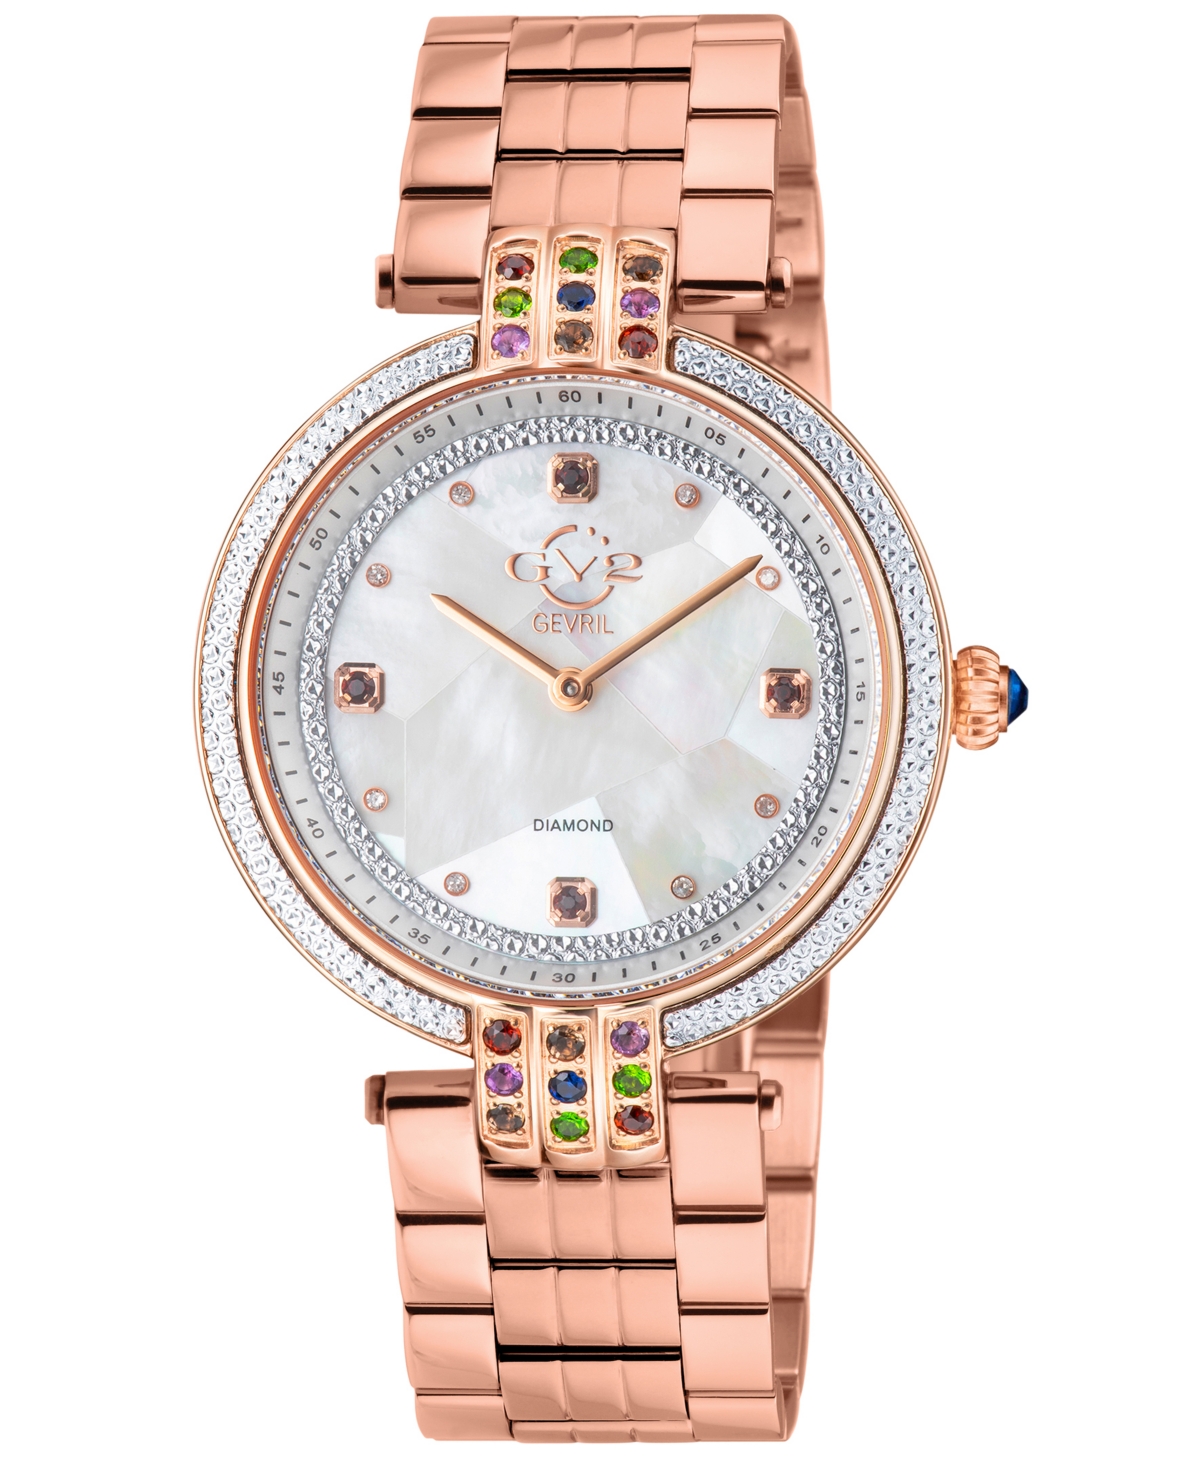 Gv2 By Gevril Women's Matera Swiss Quartz Rose Stainless Steel Watch 35mm